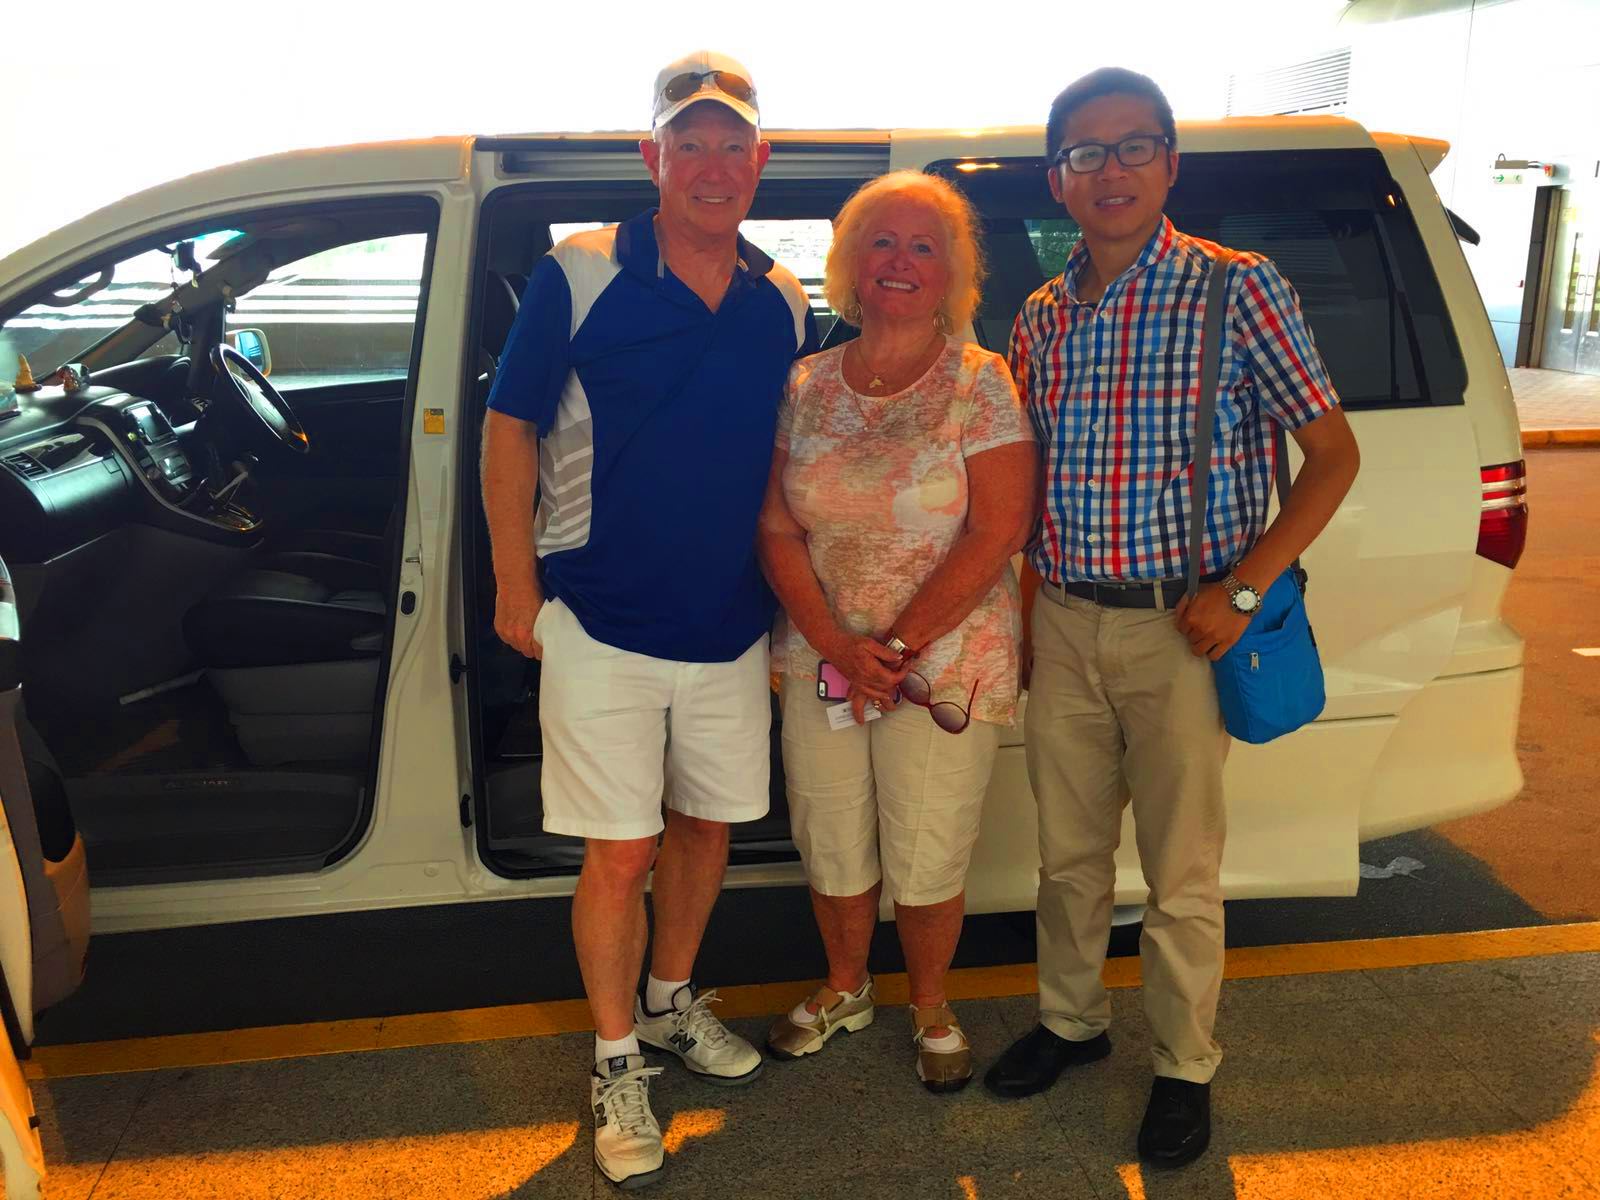 Frank the tour guide takes photo in front of the car with Mr and Mrs Ridenour from Ovation of the Seas.